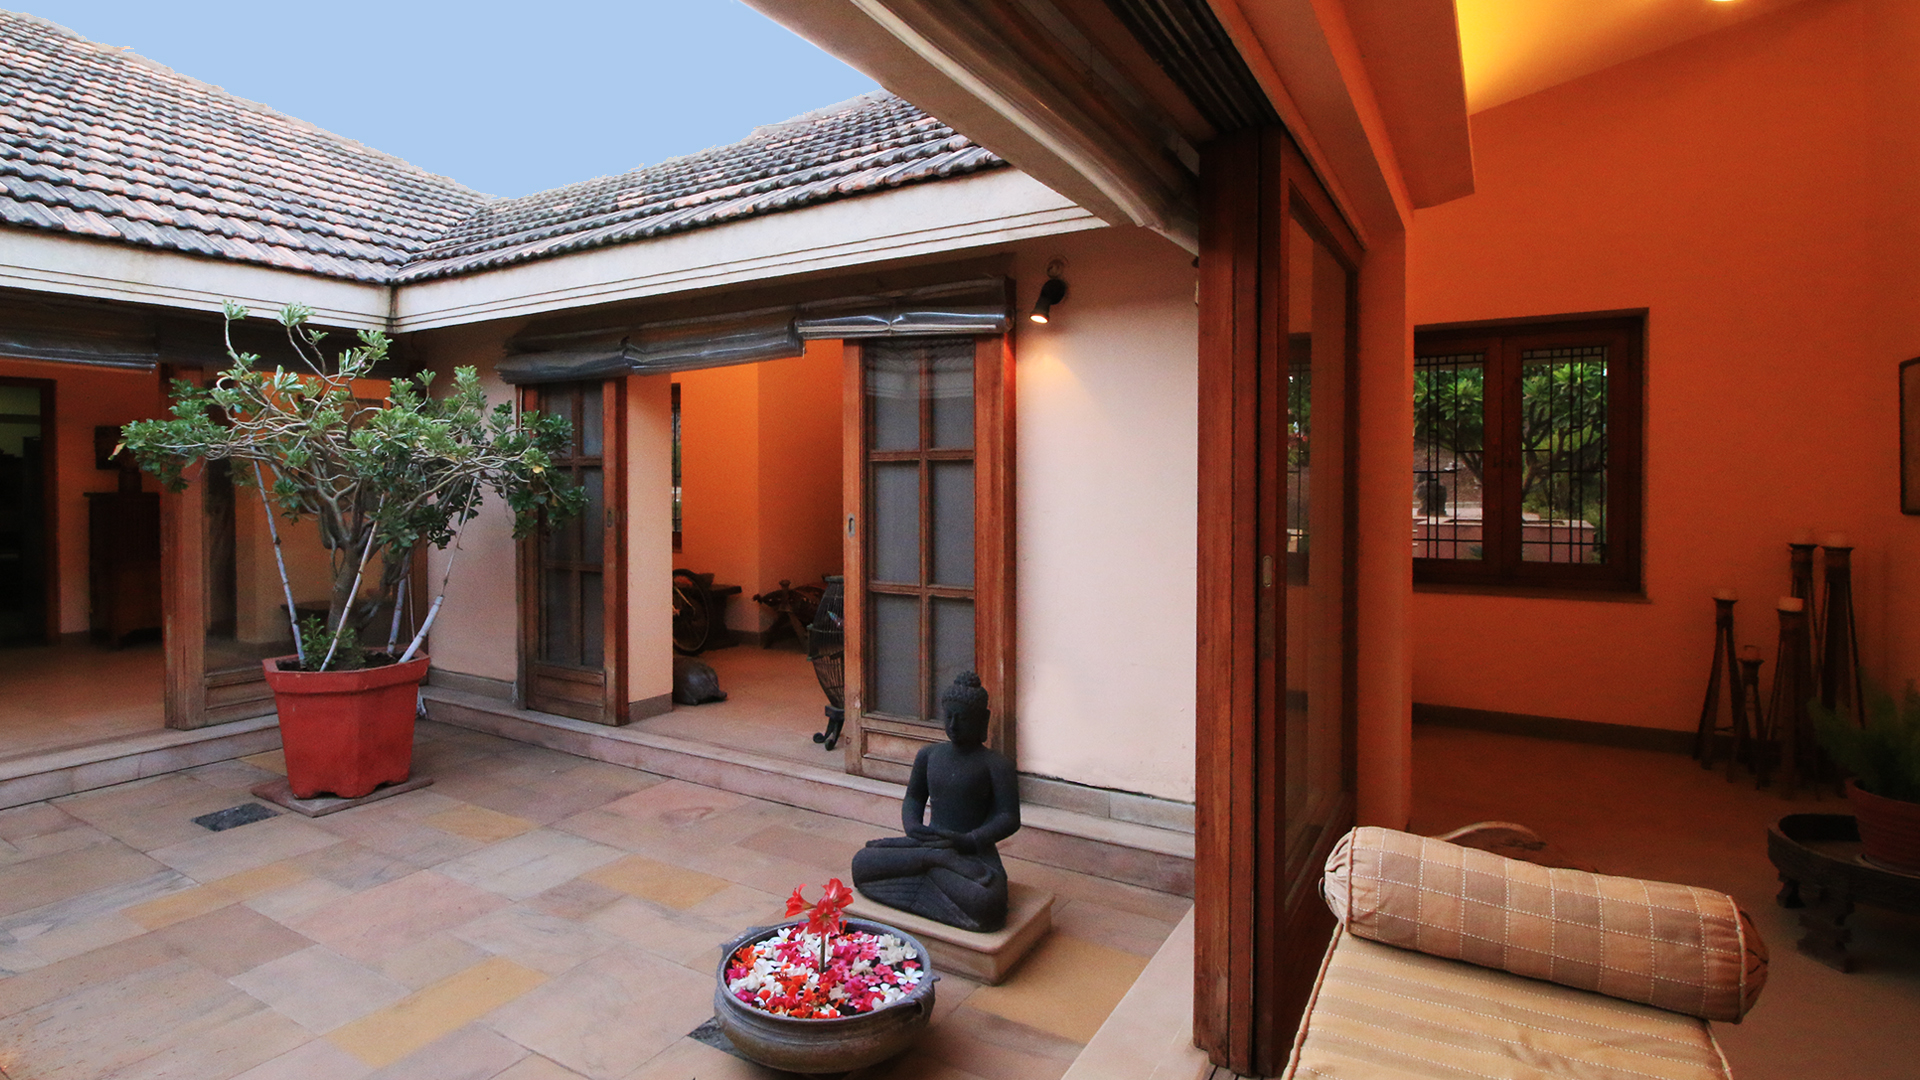 The Courtyard House Pune